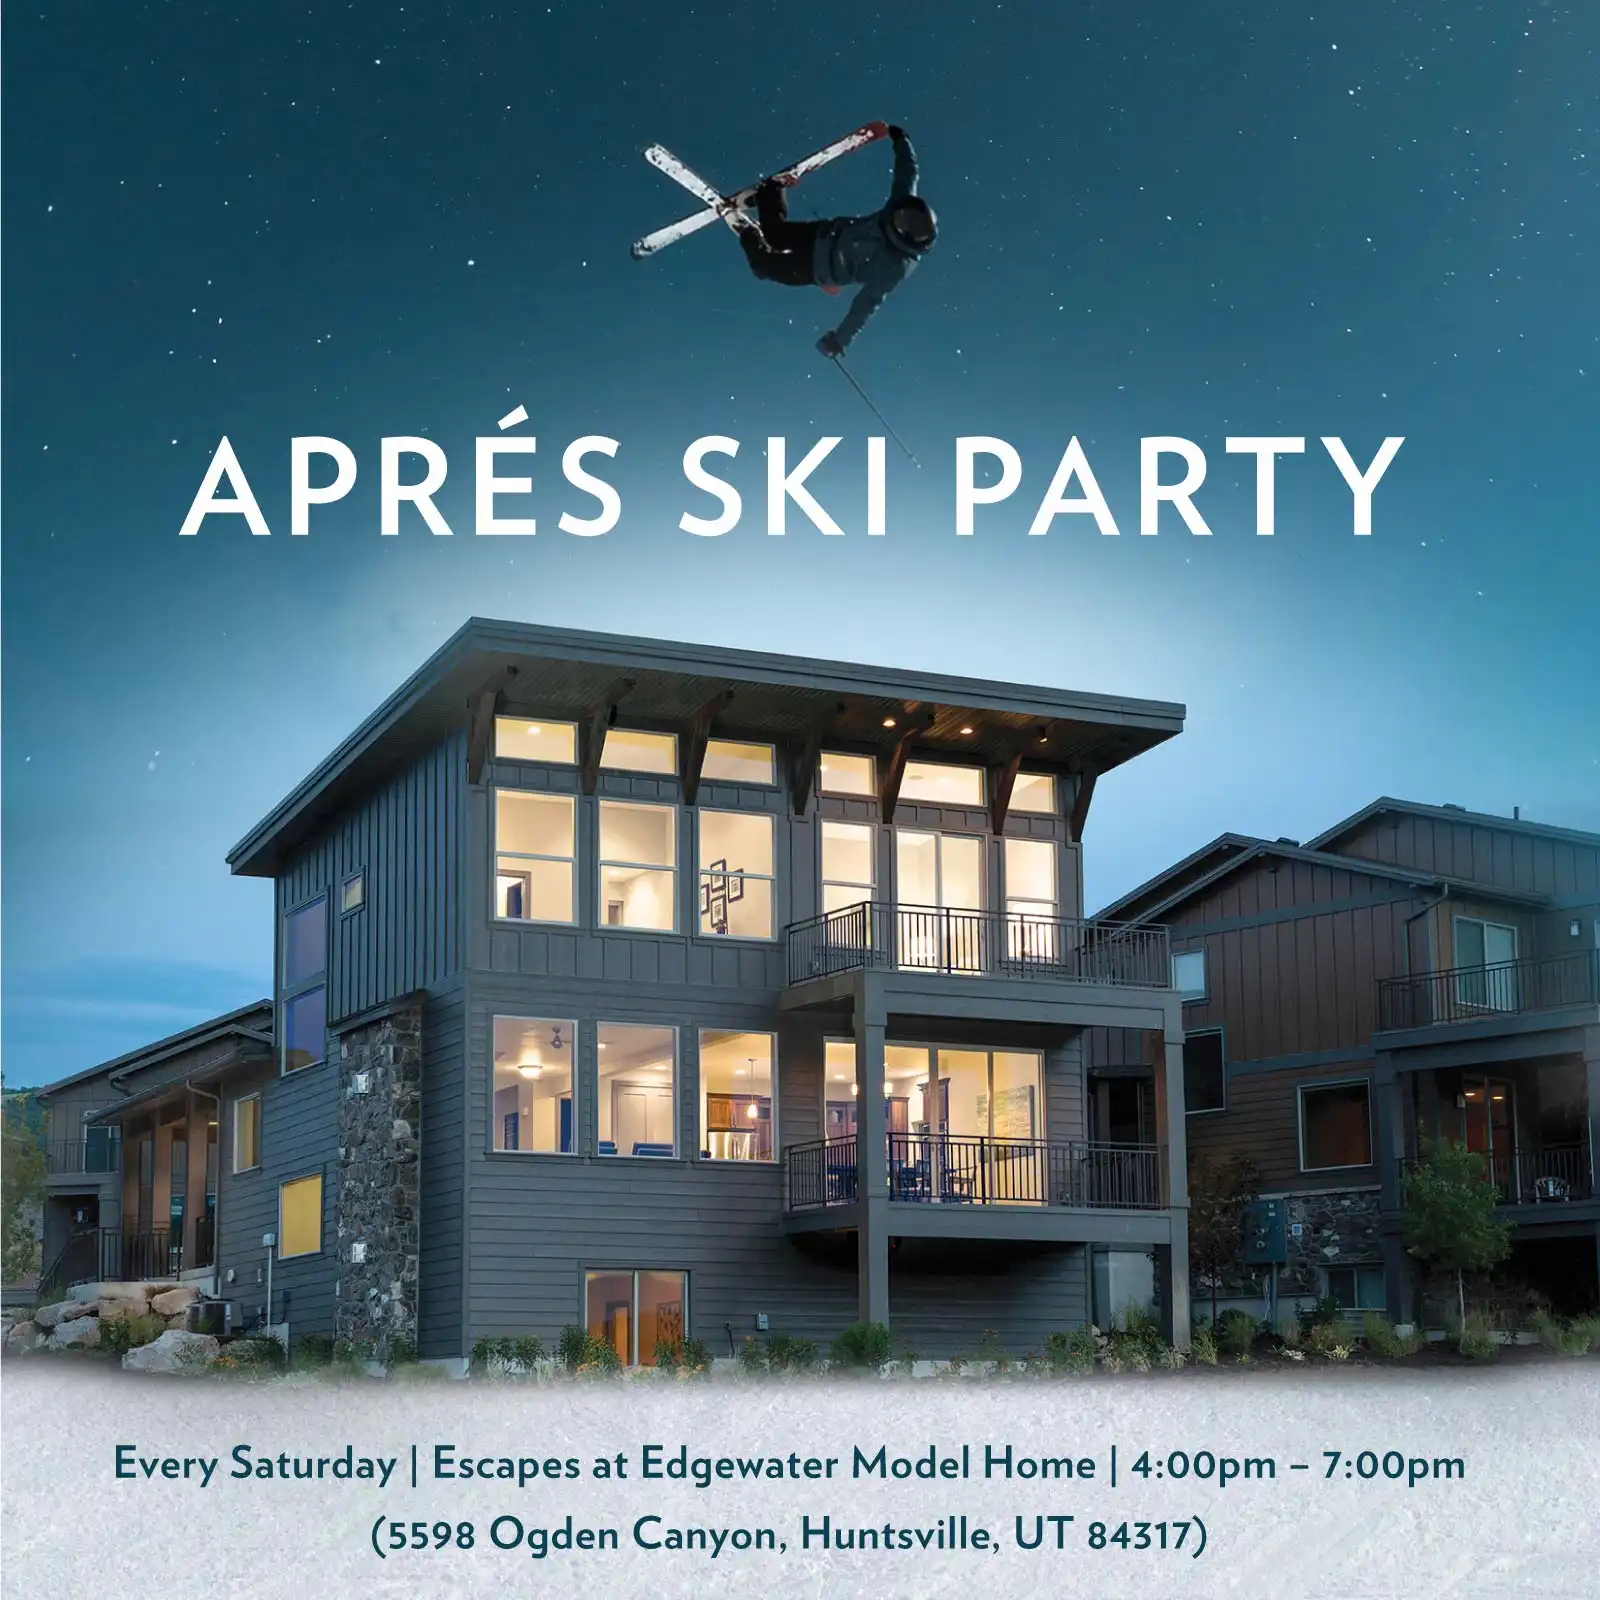 hero image for blog Aprés Ski Party! - The Escapes at Edgewater